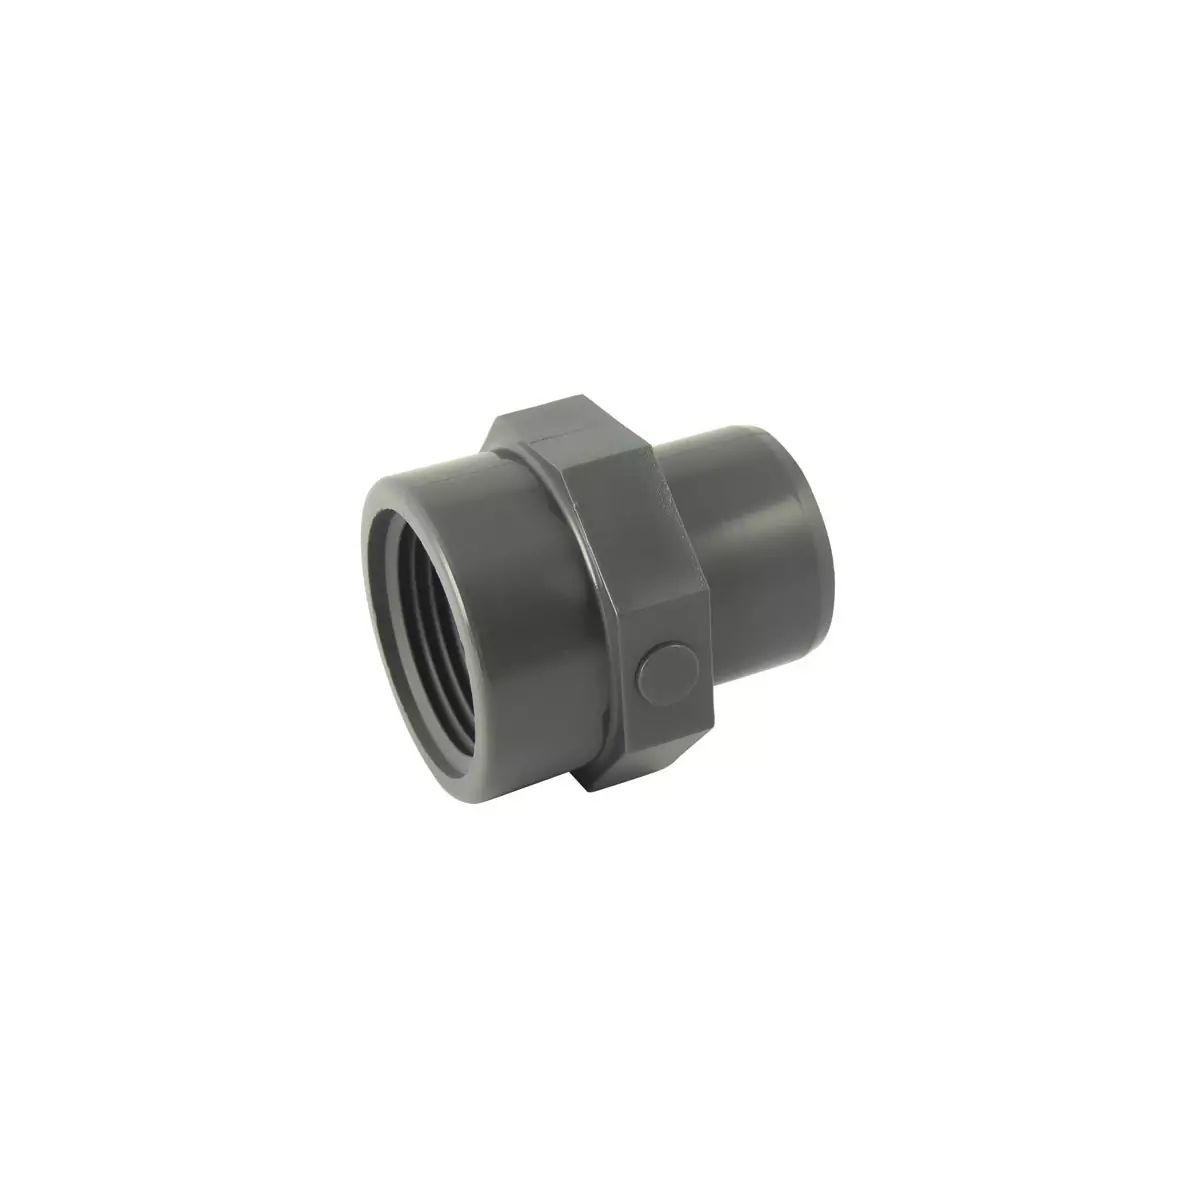 Male adapter to stick / female to screw in PVC